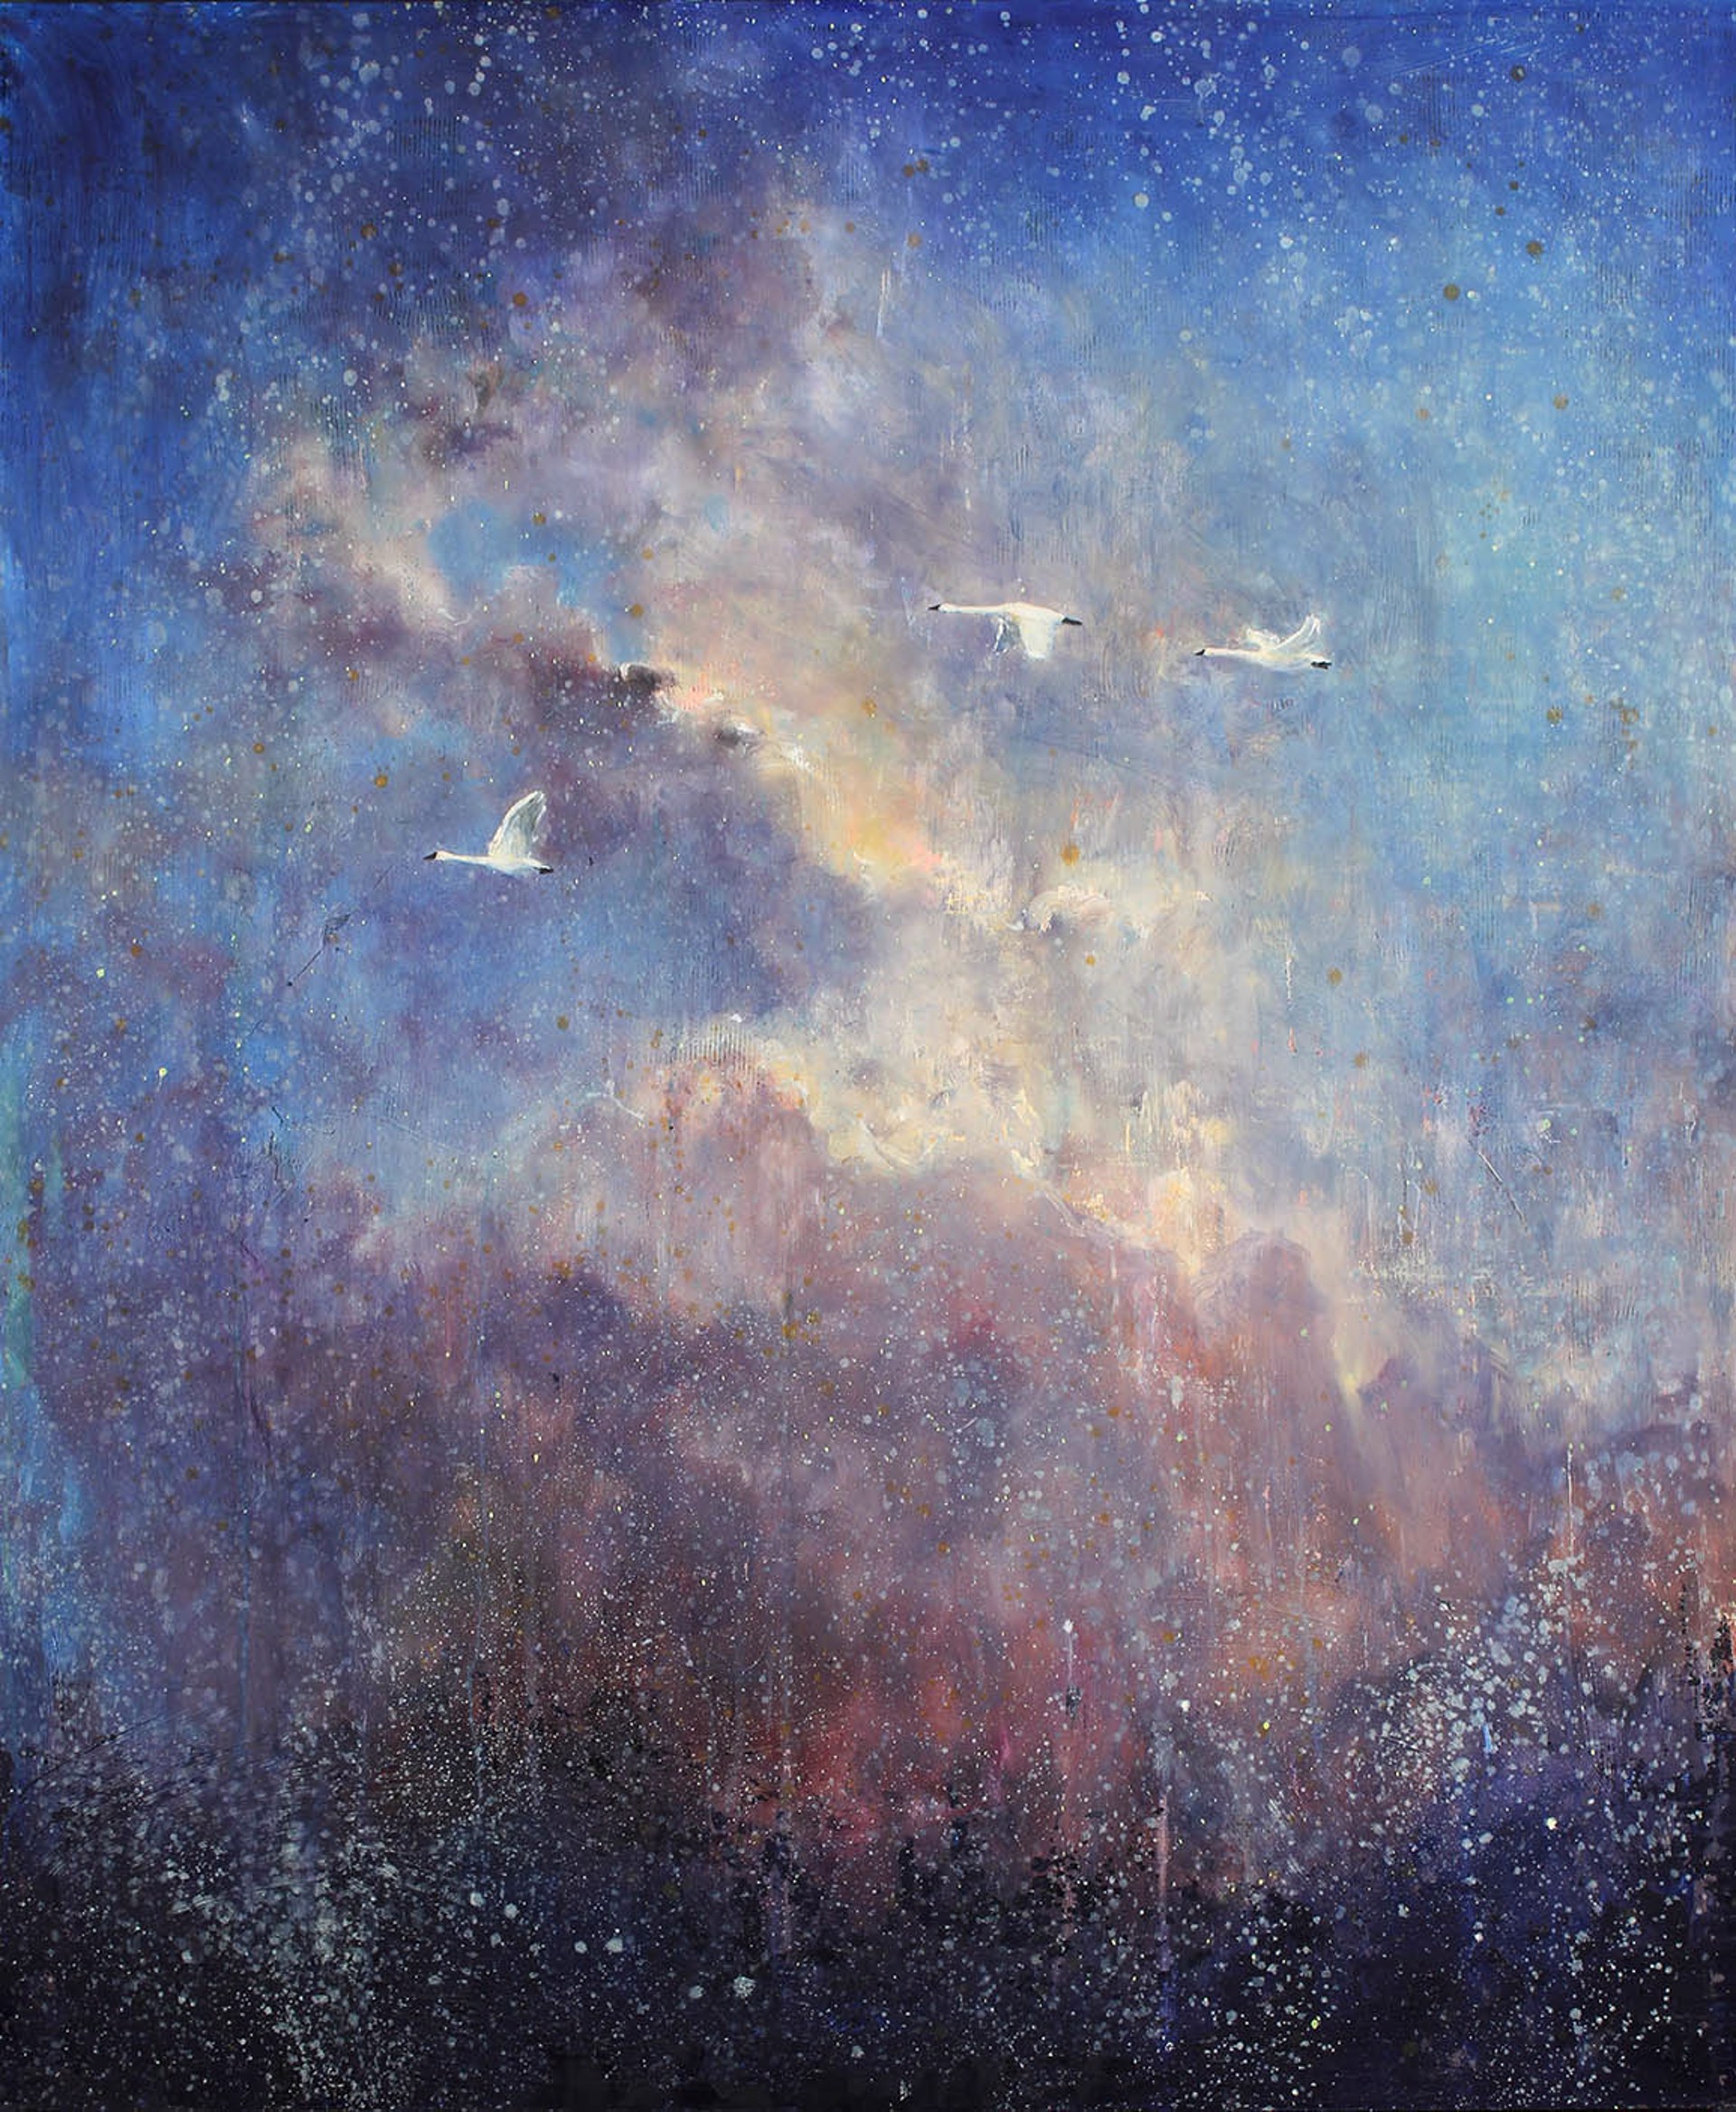 A Mixed Media Painting Of Three Swans Flying With Clouds In The Background By Matt Flint At Gallery Wild